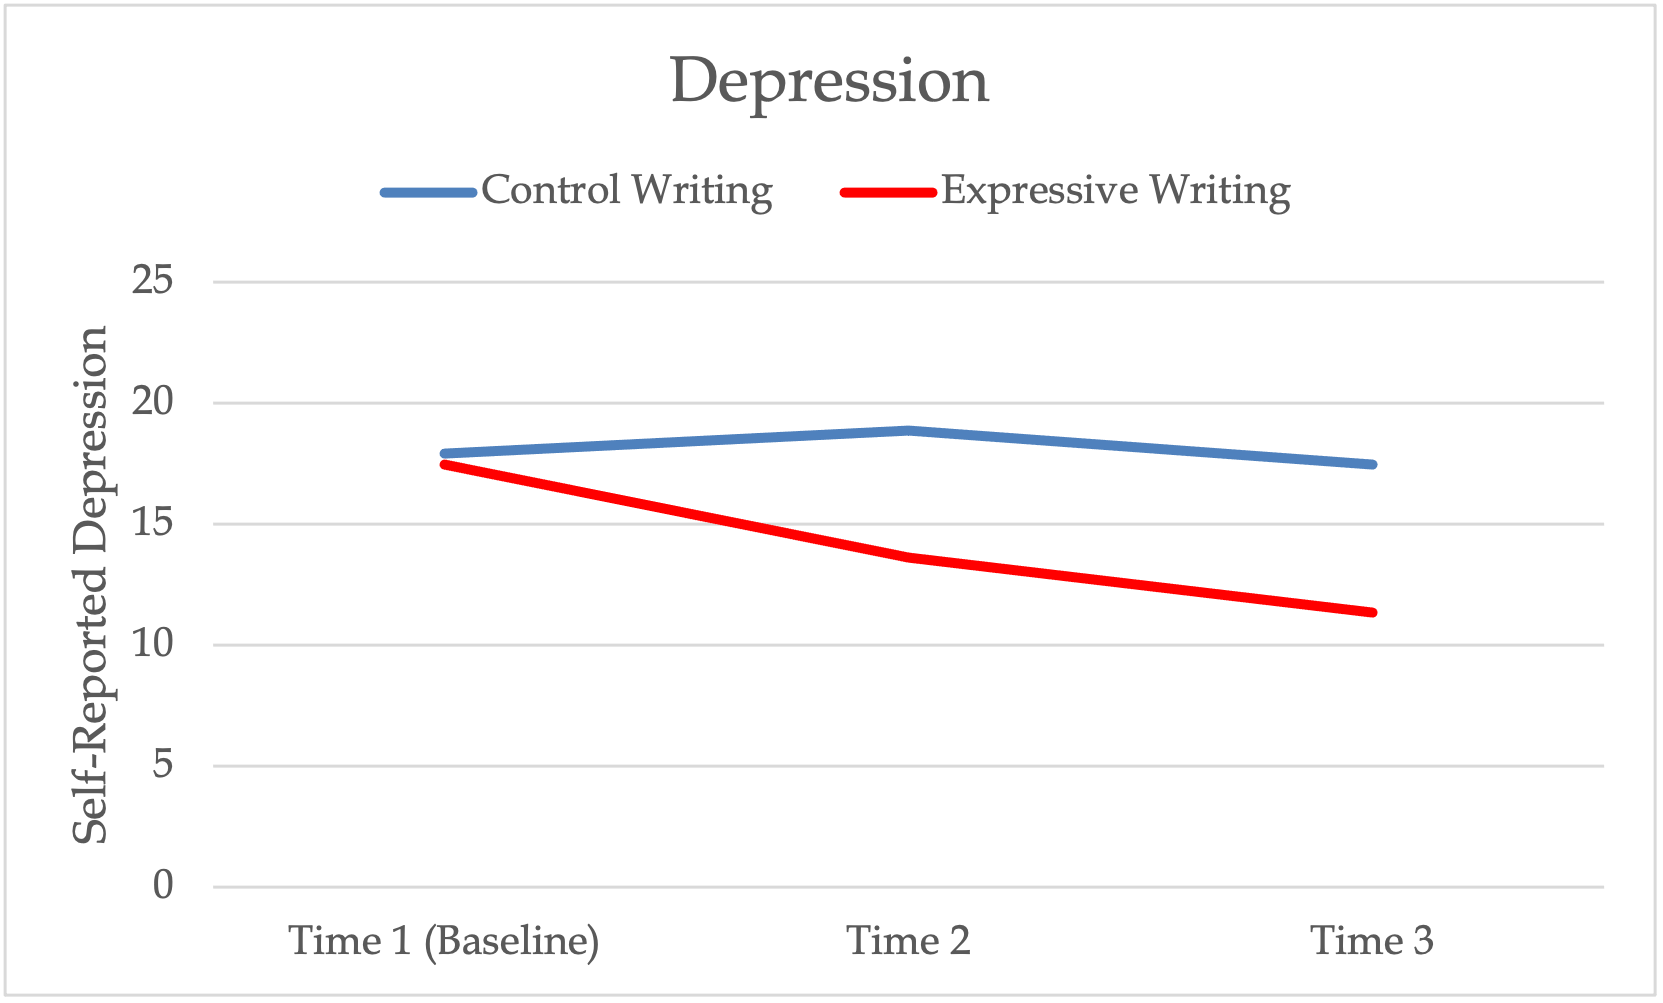 A line graph showing depression levels during control writing, and expressive writing.